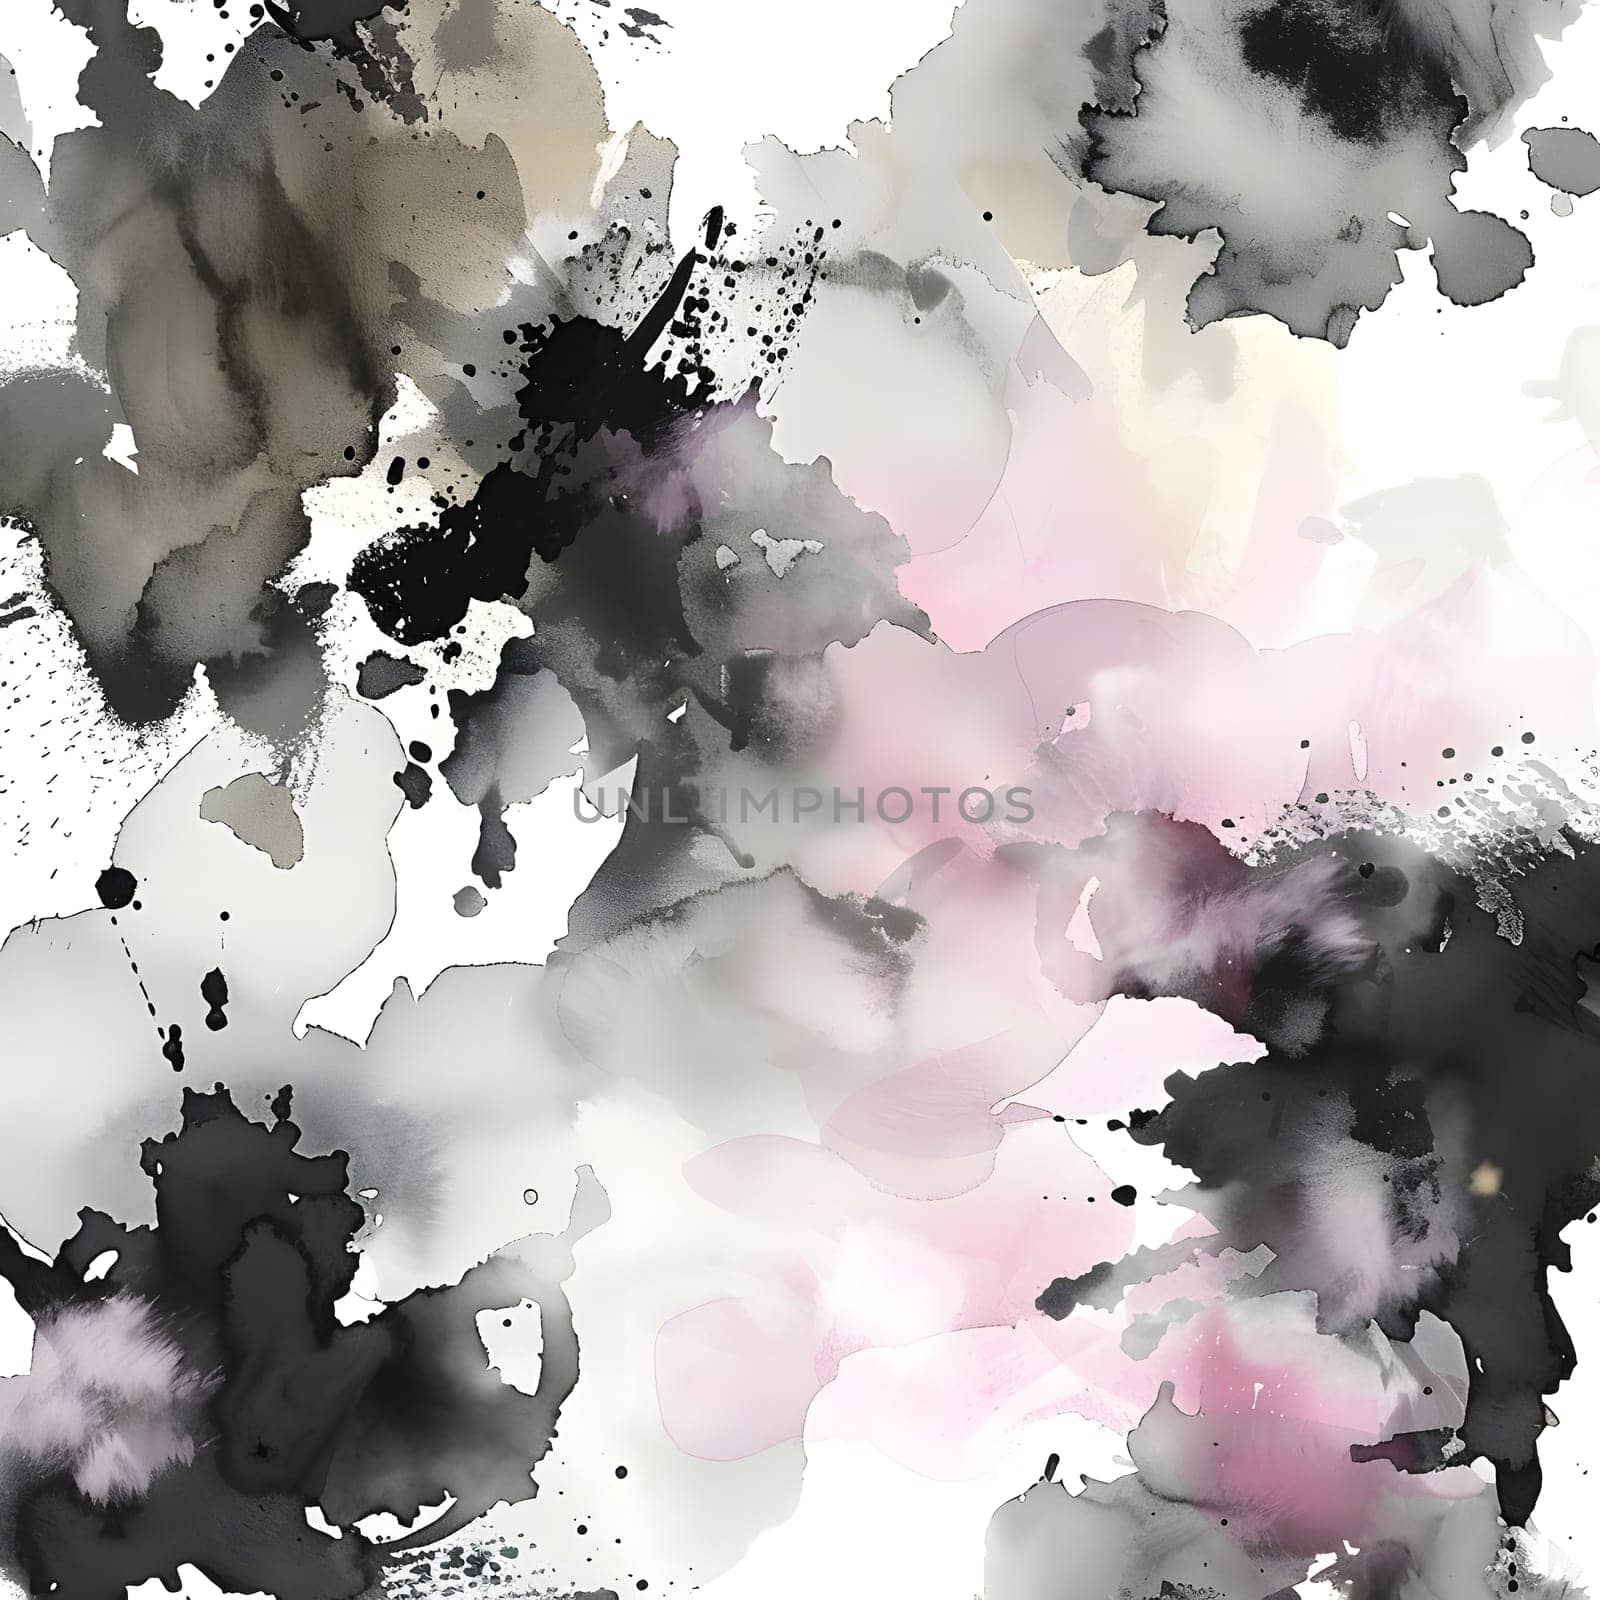 A watercolor painting featuring black, white, and pink hues creating a beautiful blend of colors resembling clouds, plants, petals, and trees on a white background